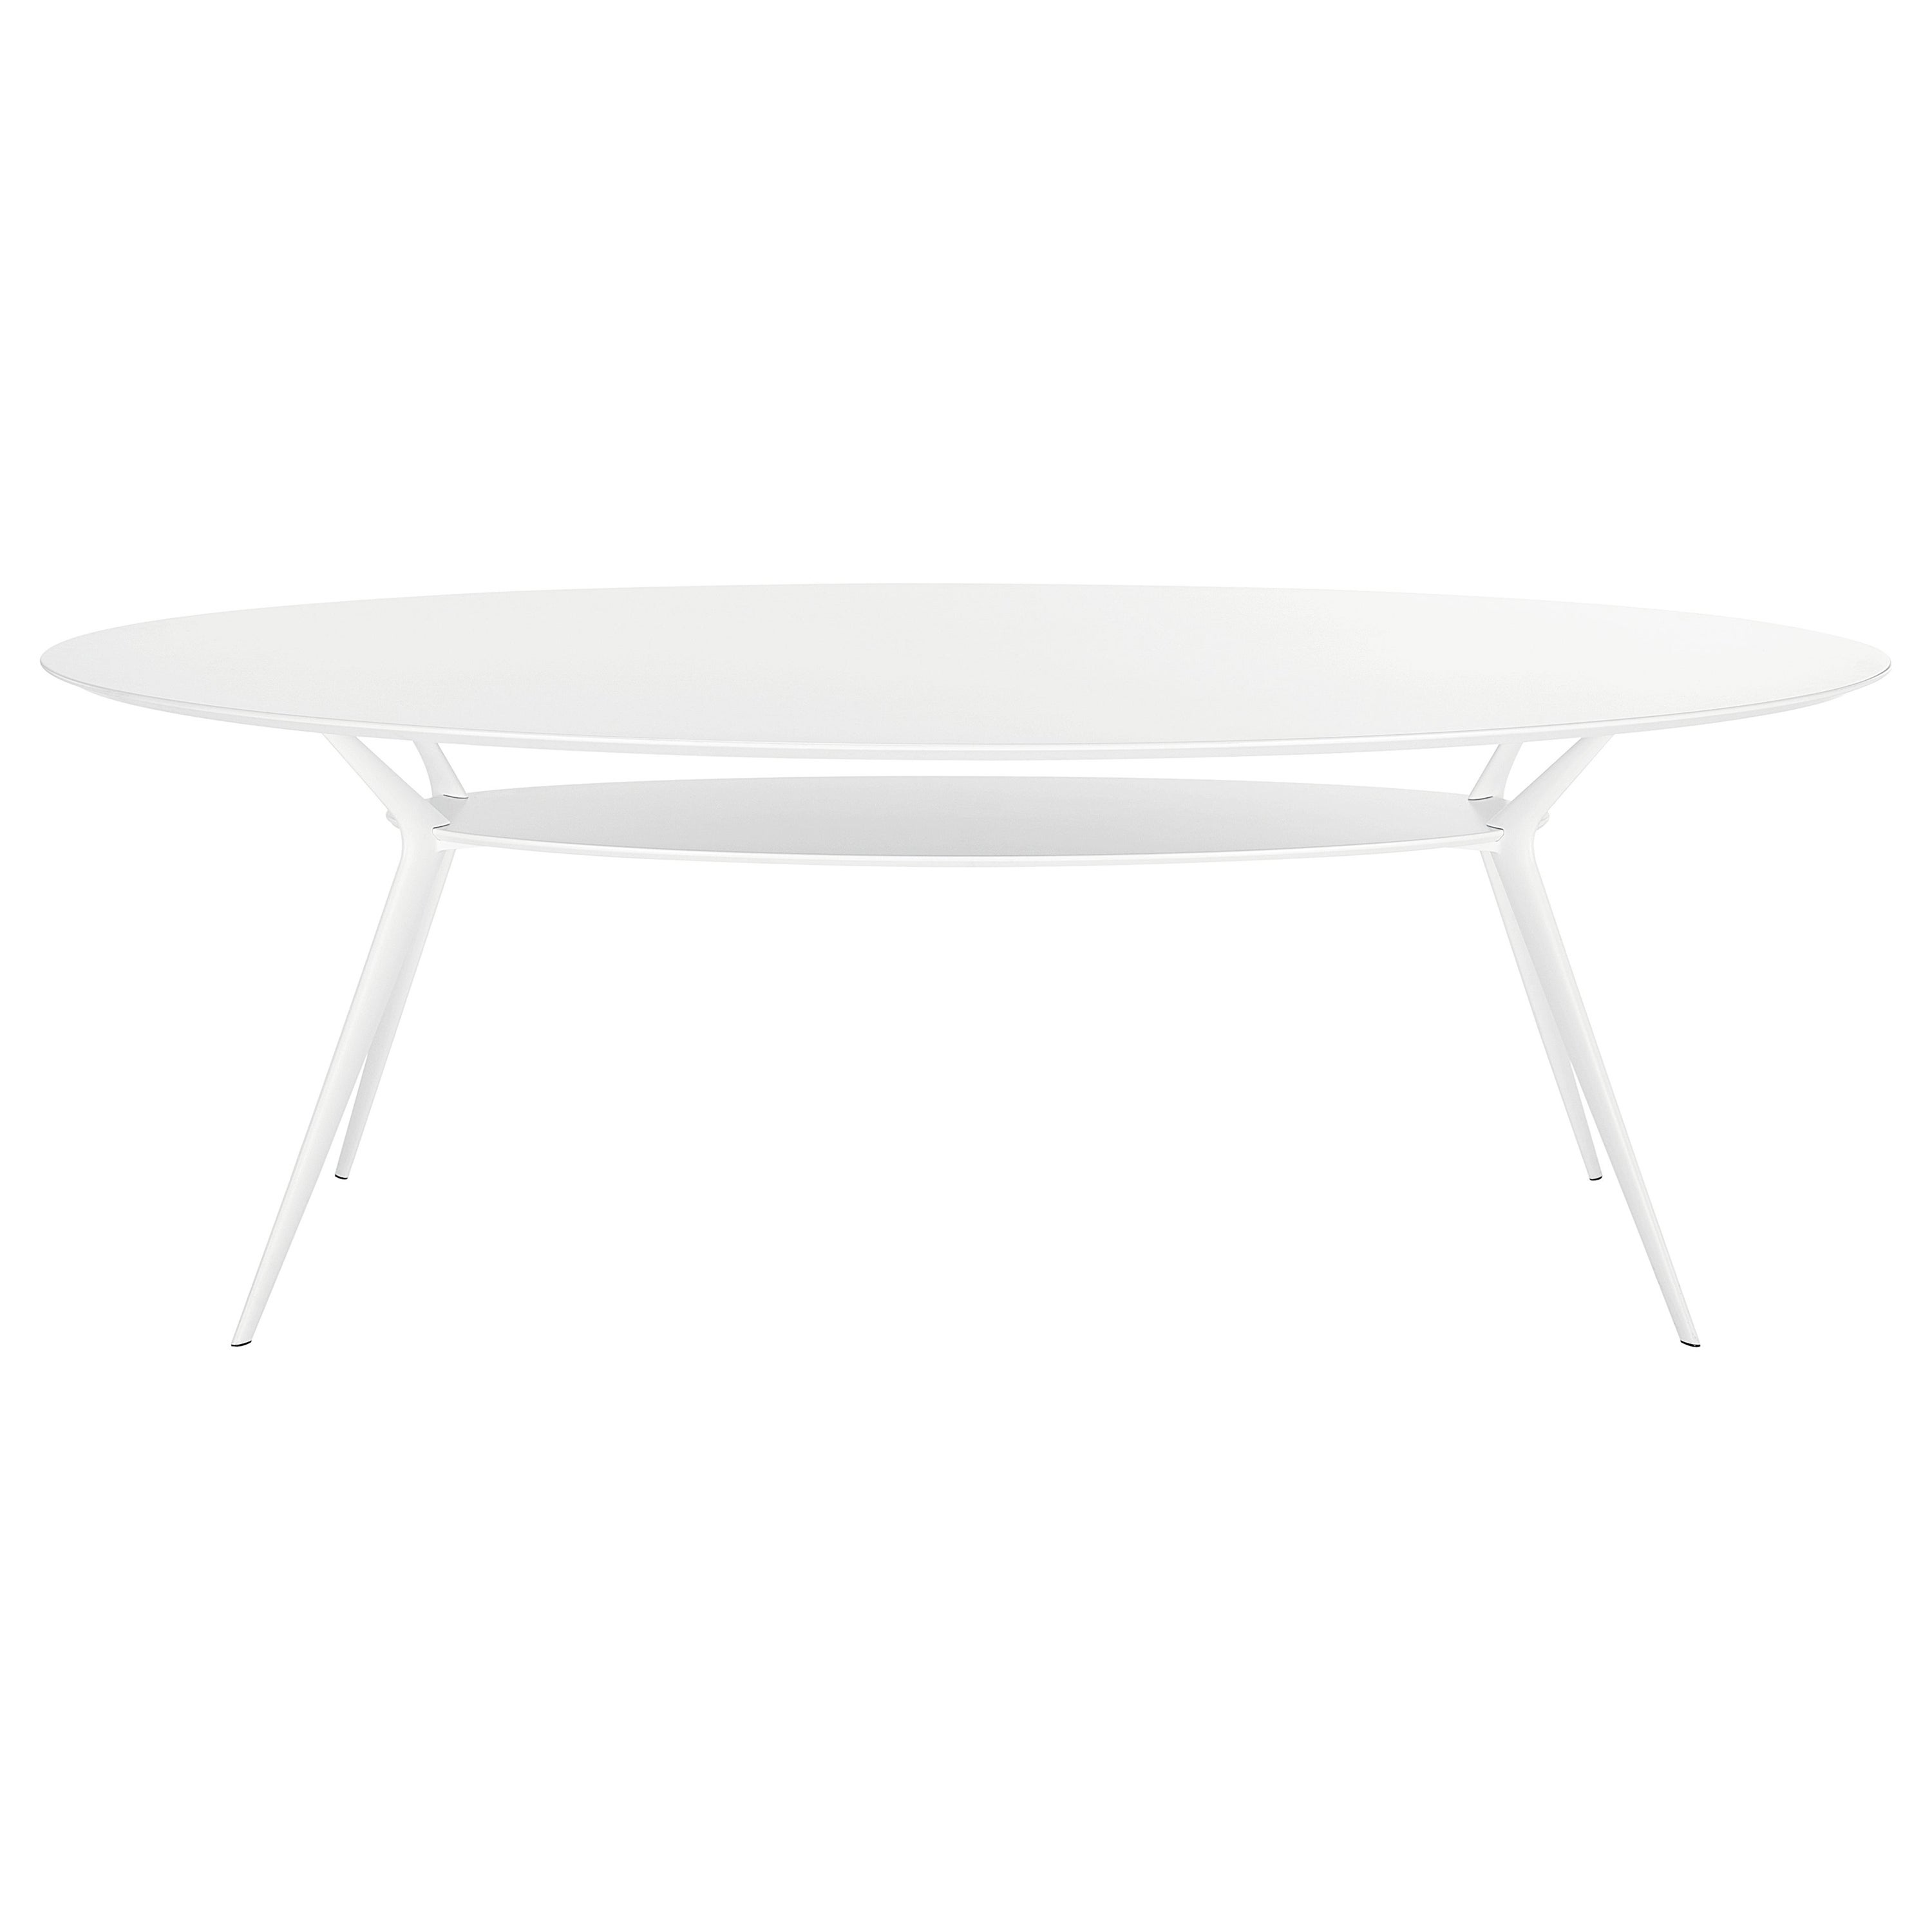 Alias Biplane 407 Oval Table in White MDF Top and White Polished Aluminium Frame